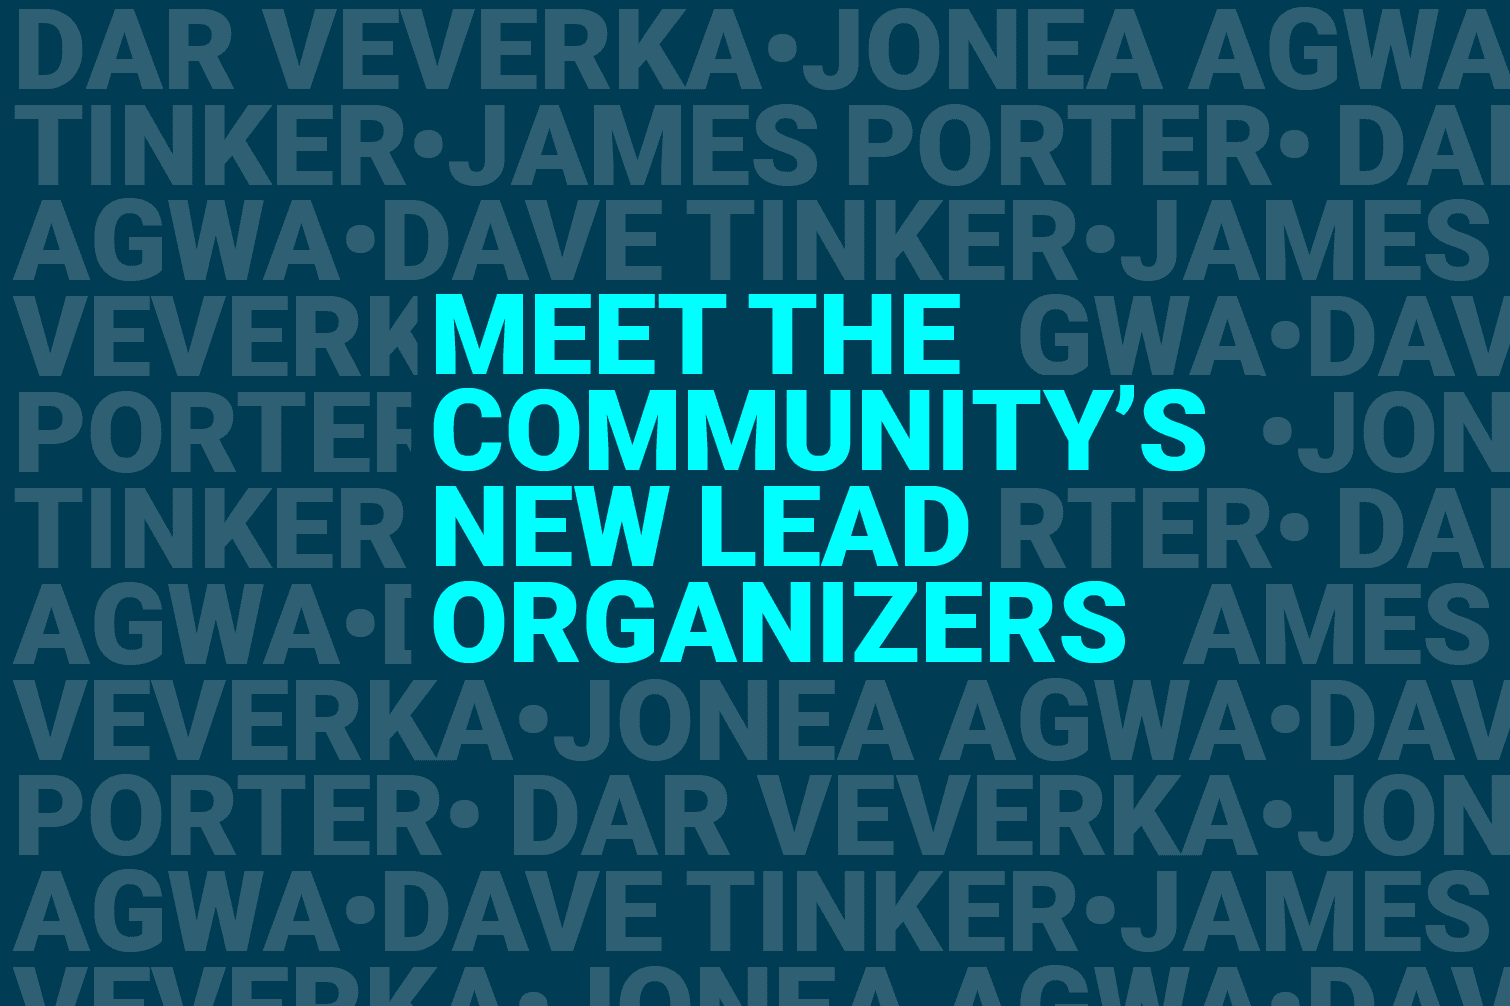 "Meet the Community's Lead Organizers" set against a repeating background of the organizer's names: Dave Tinker, James Porter, Dar Veverka, and Jonea Agwa.